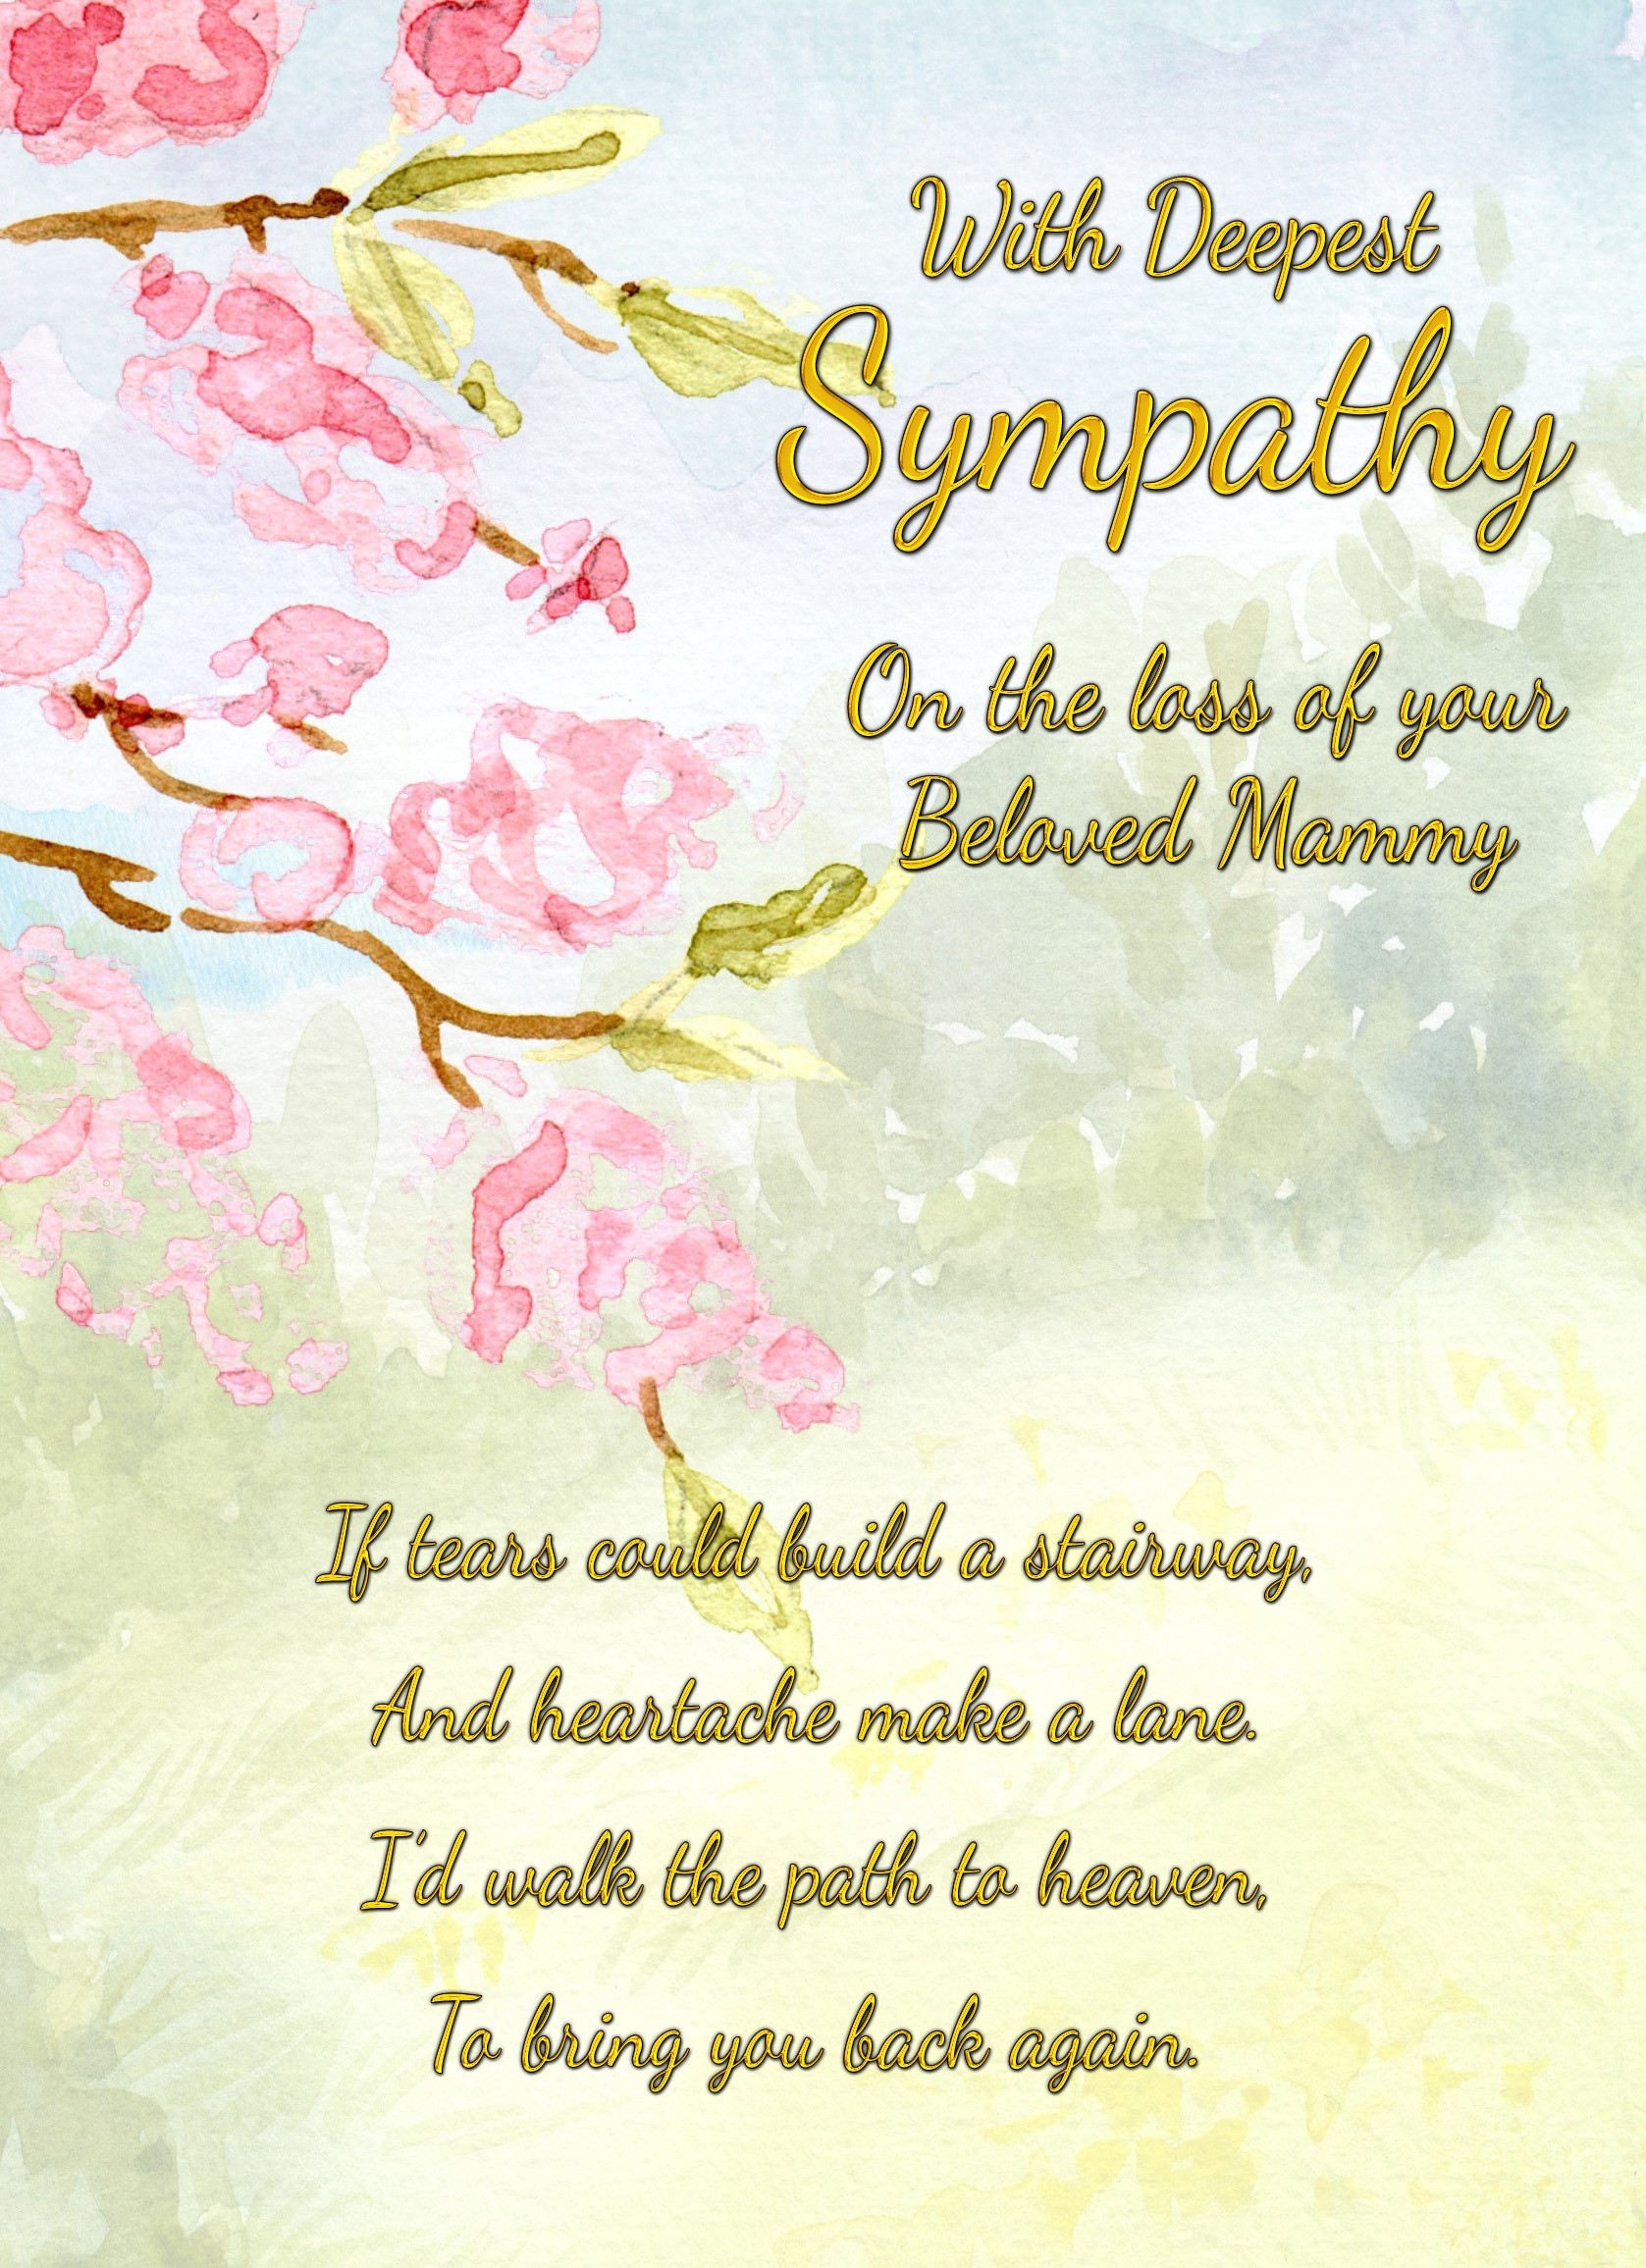 Sympathy Bereavement Card (With Deepest Sympathy, Beloved Mammy)